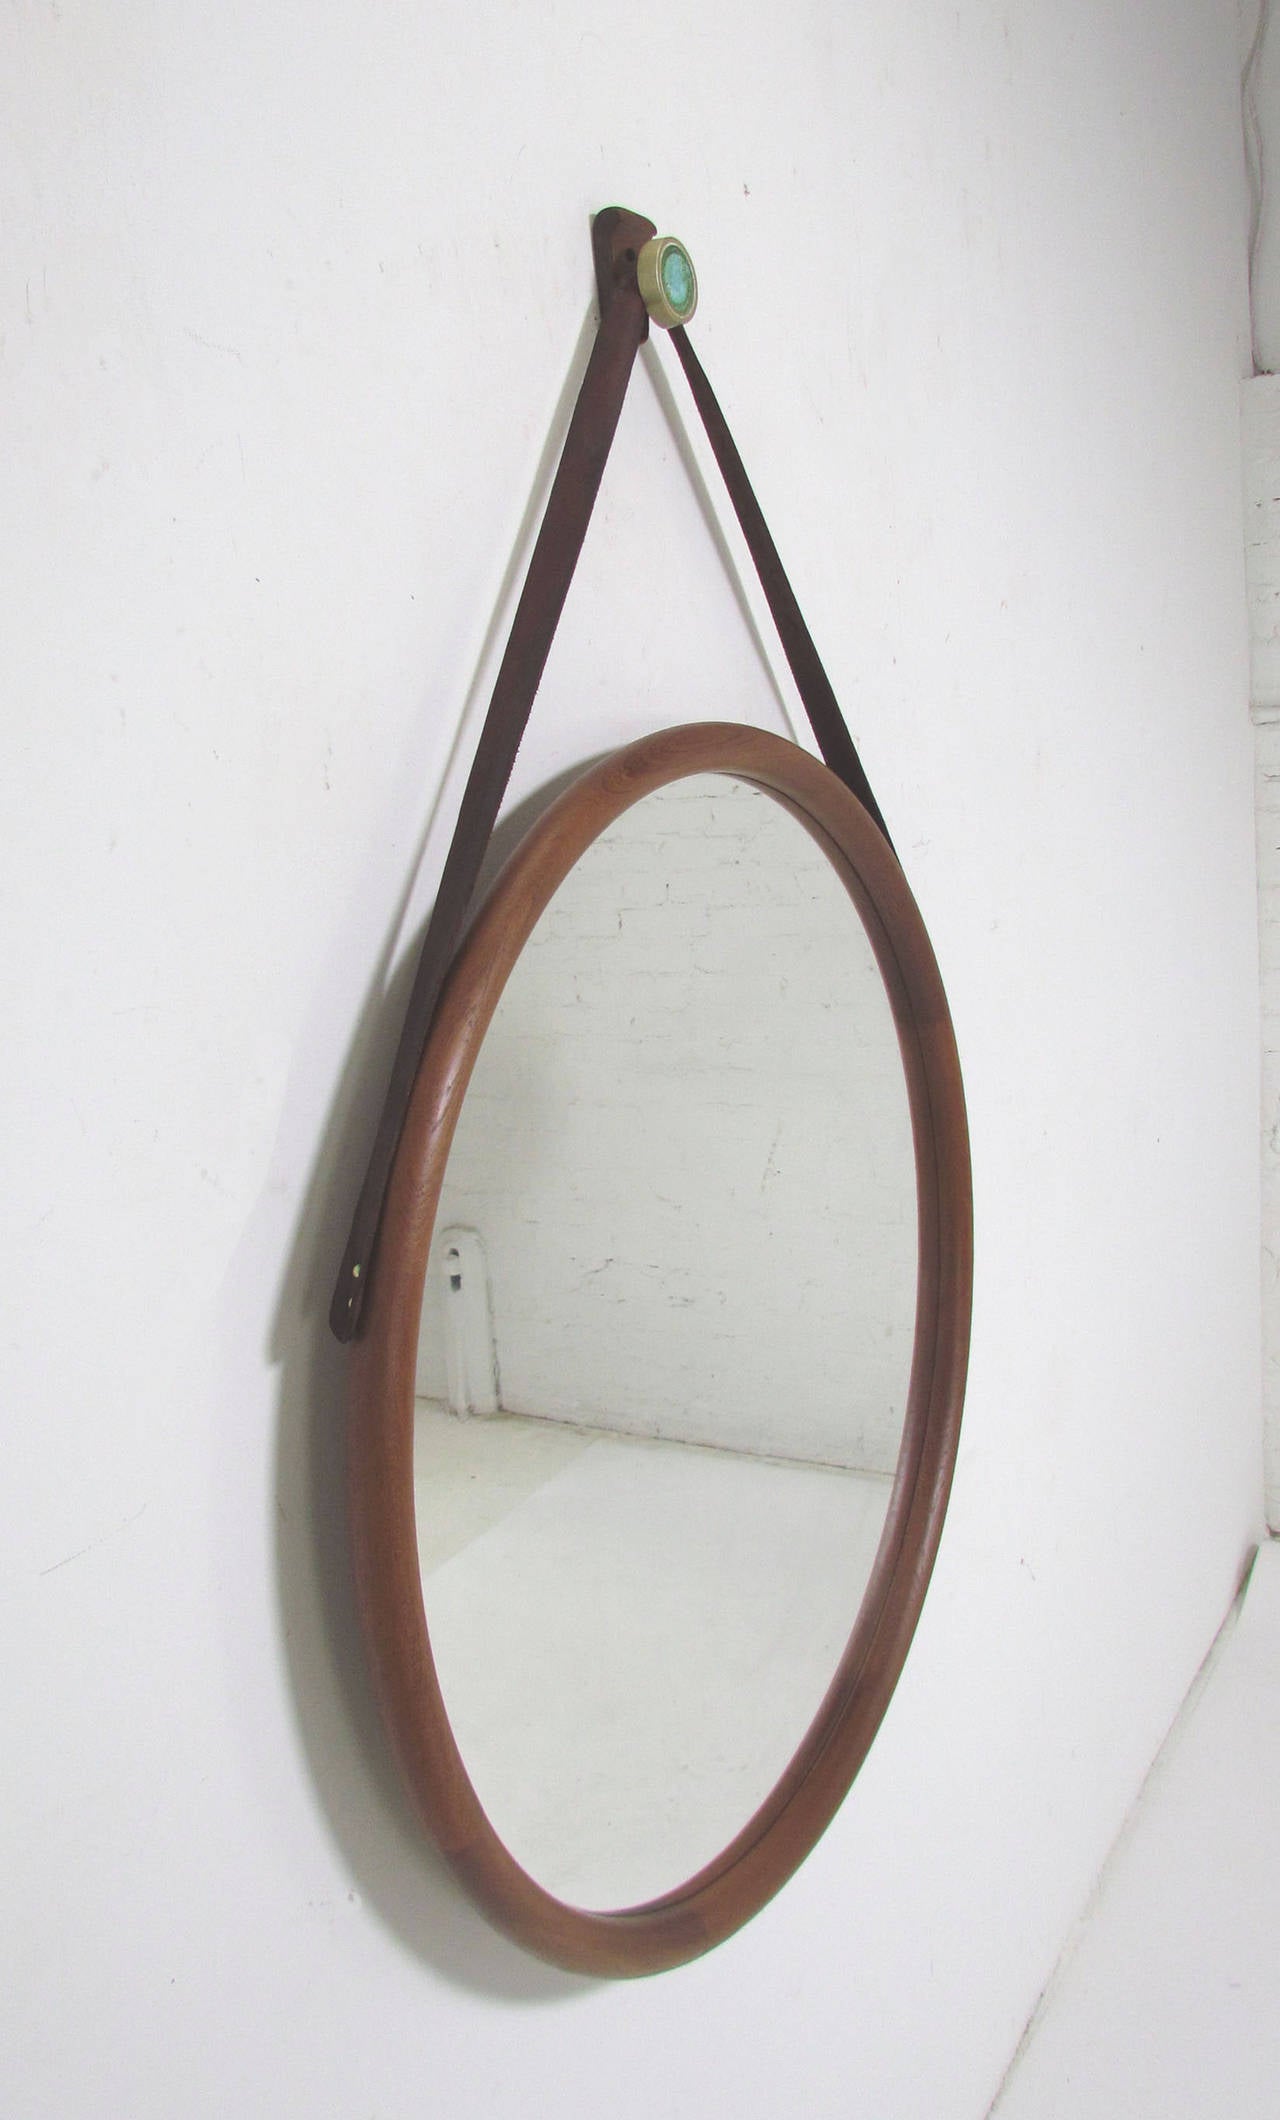 Scandinavian Modern Large Danish Teak Wall Mirror with Leather Strap and Tile Hook